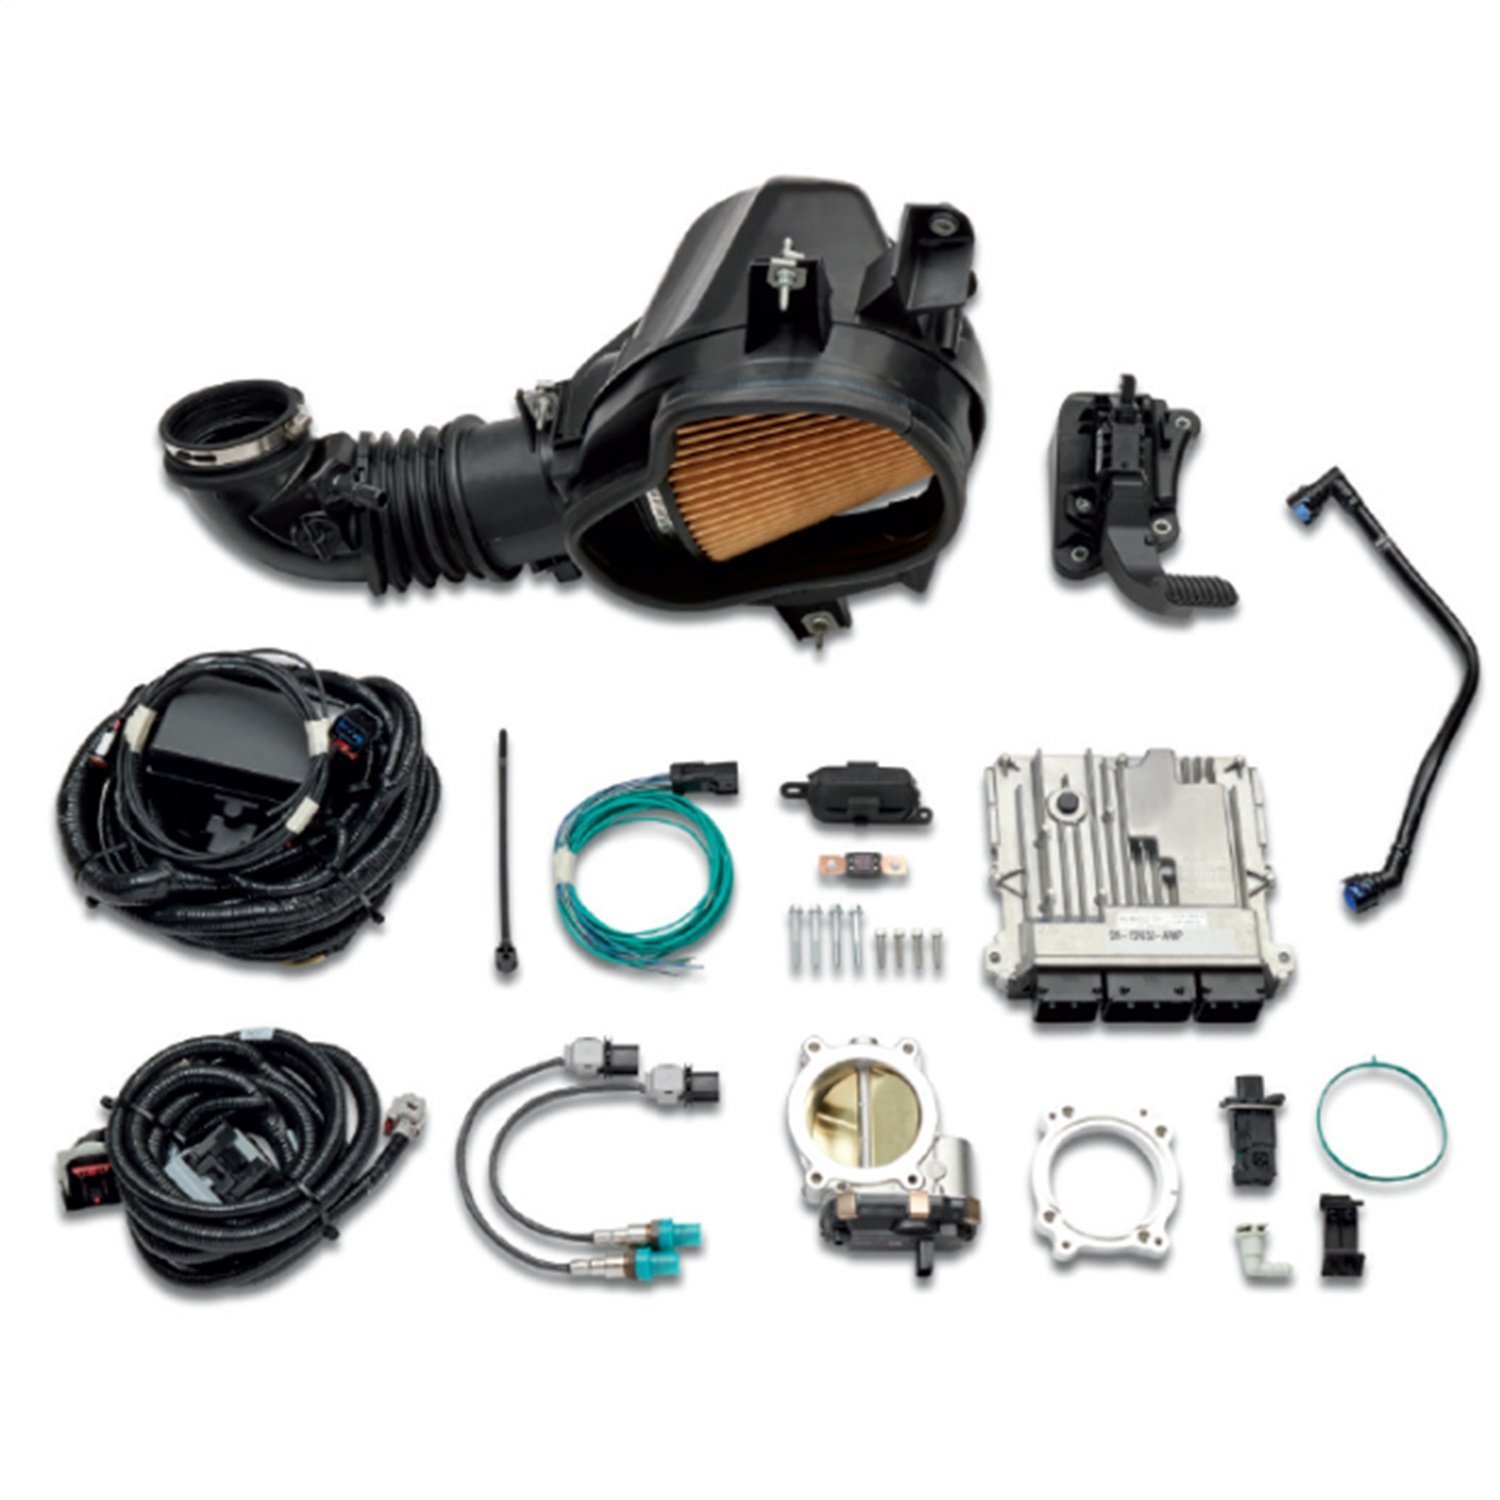 7.3L Engine Control Pack with 10R140 Auto Trans